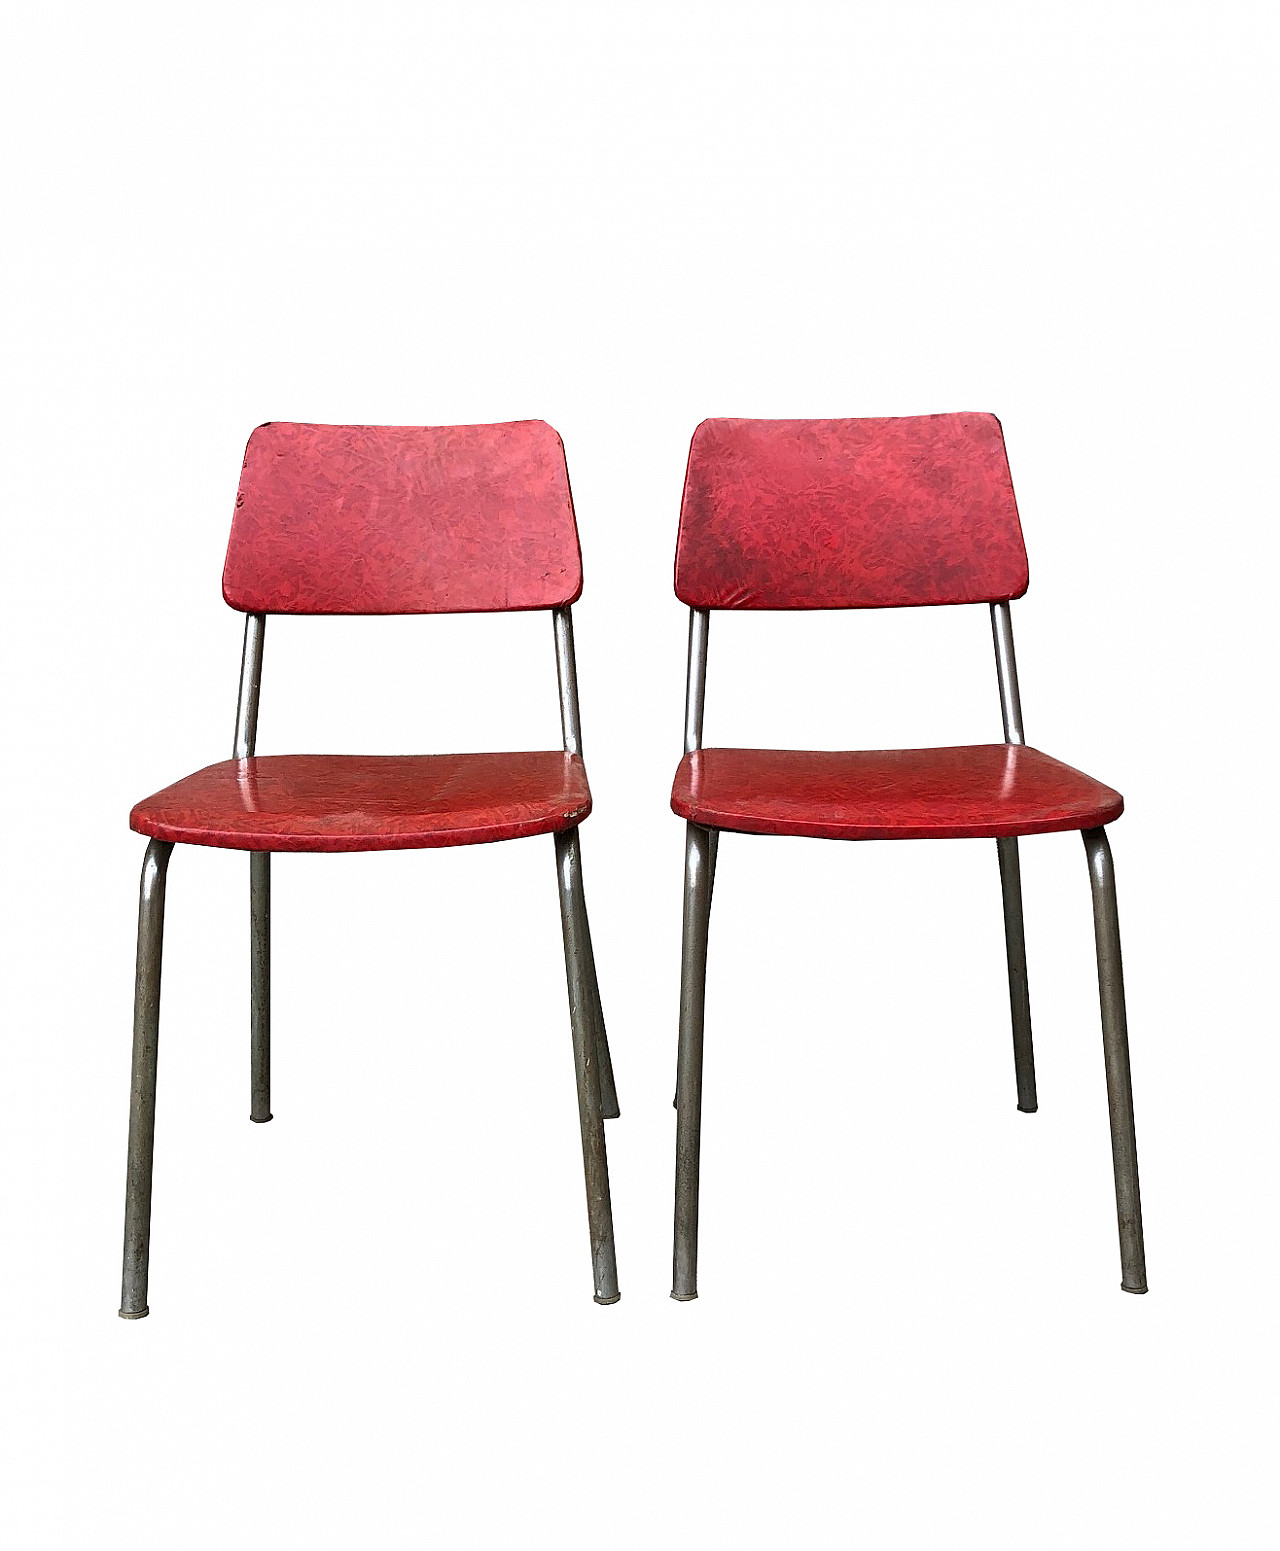 Red vintage "American style" kitchen chairs, 60's 1